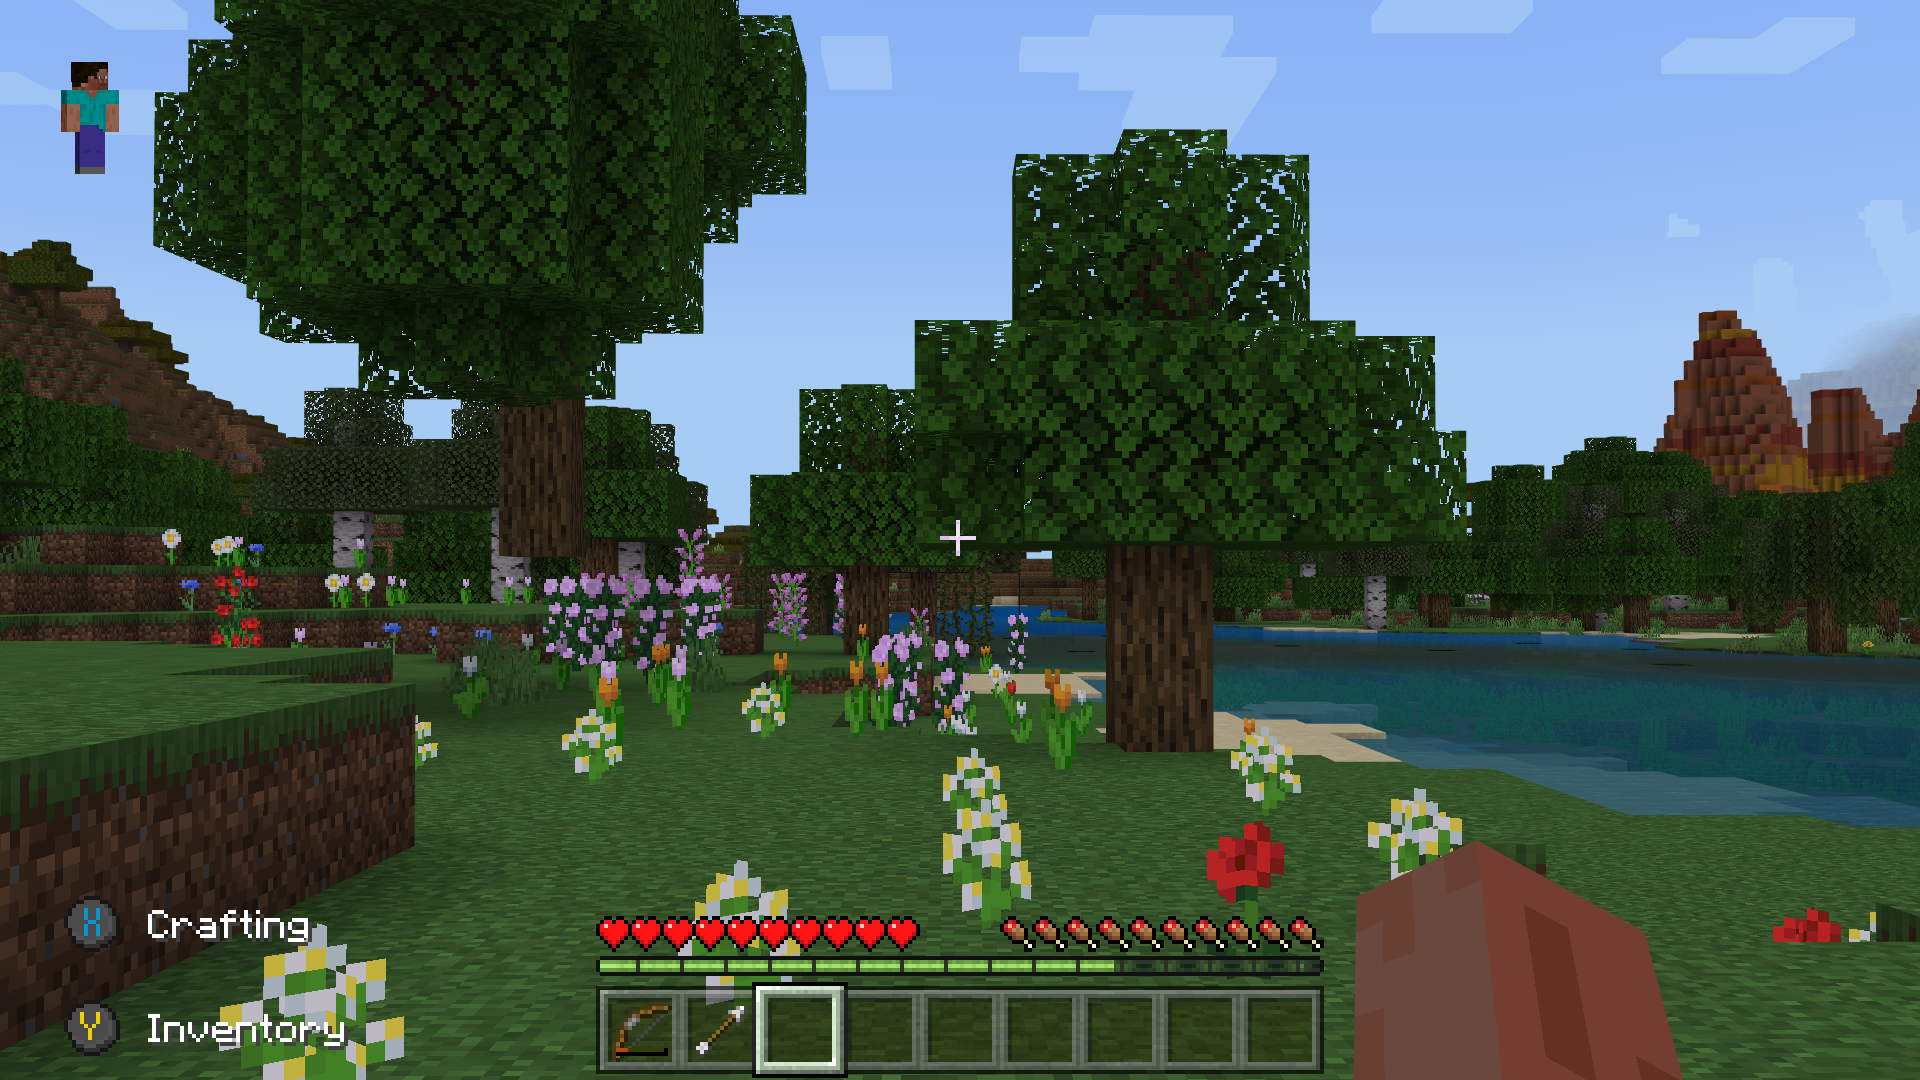 Minecraft screenshot of low field of view showing less in view compared to the wide lens screen shot in the previous image. The tree on the left and flowers on a ridge to the right can no longer be seen, and the number of white and red flowers in view has decreased. Everything in view has been brought inwards and no more stretching near the edges of the screen is present.